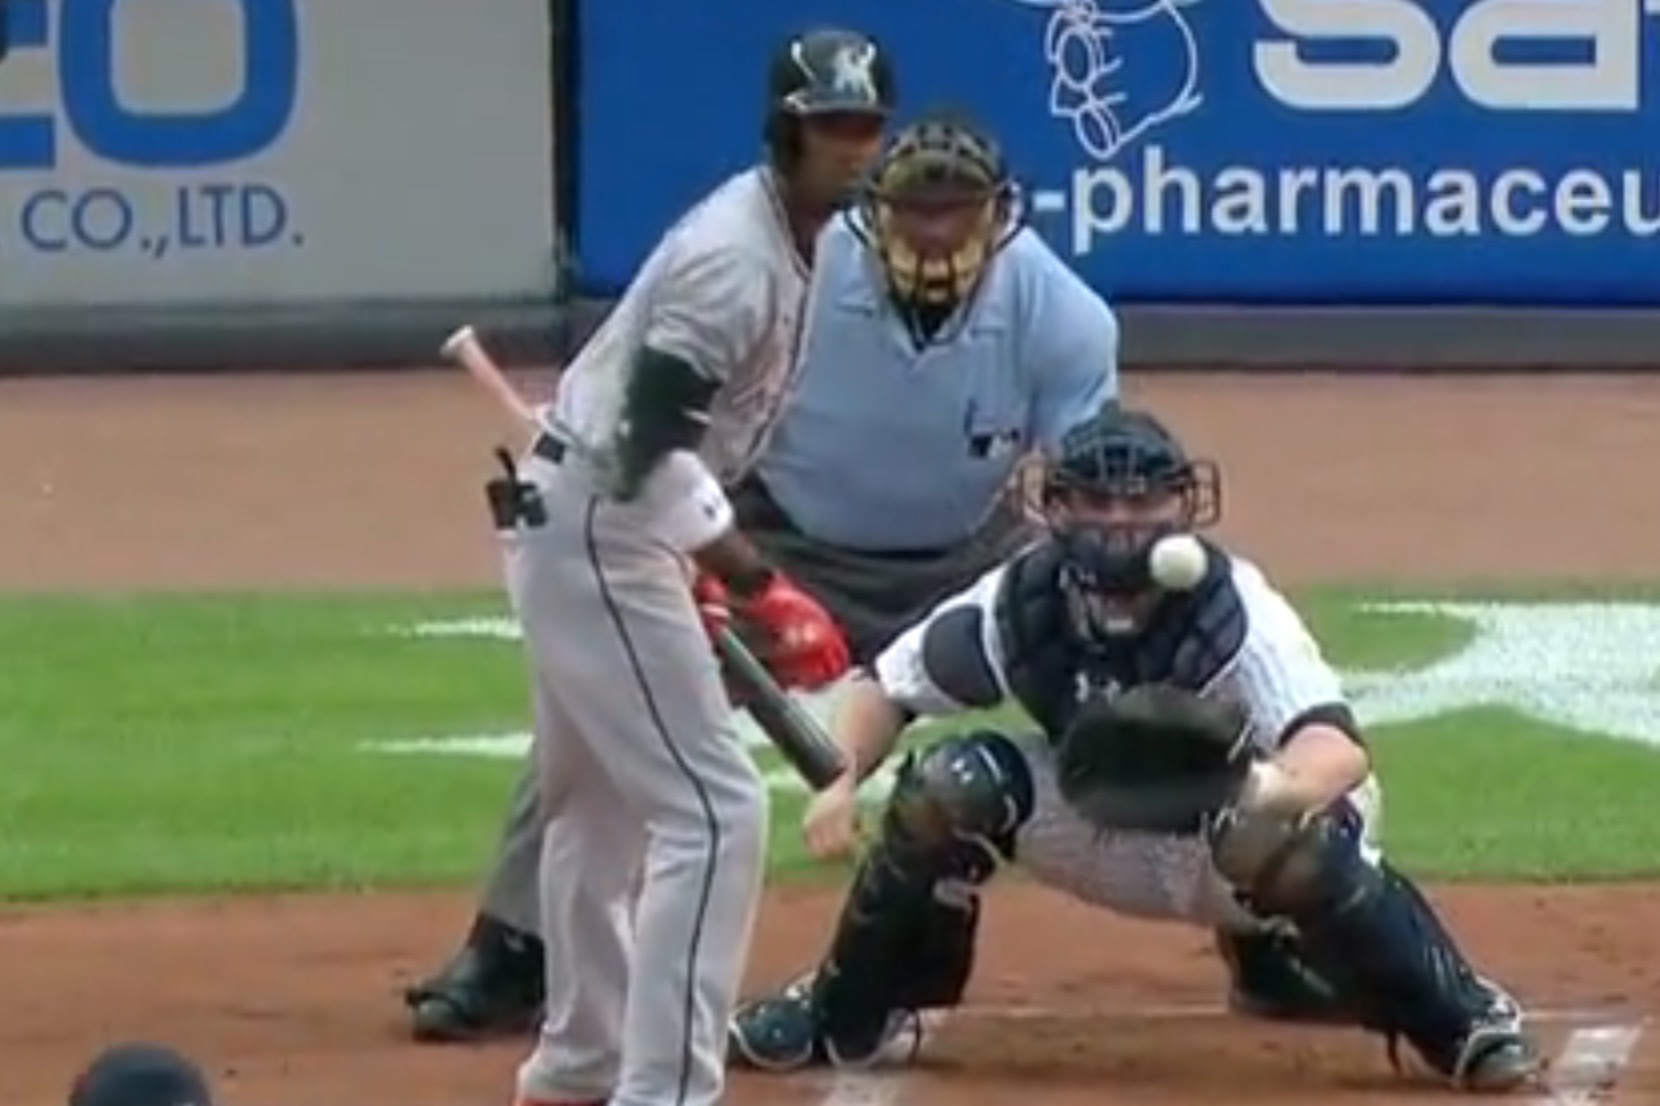 Dee Gordon just watches as Michael Pineda strikes him out